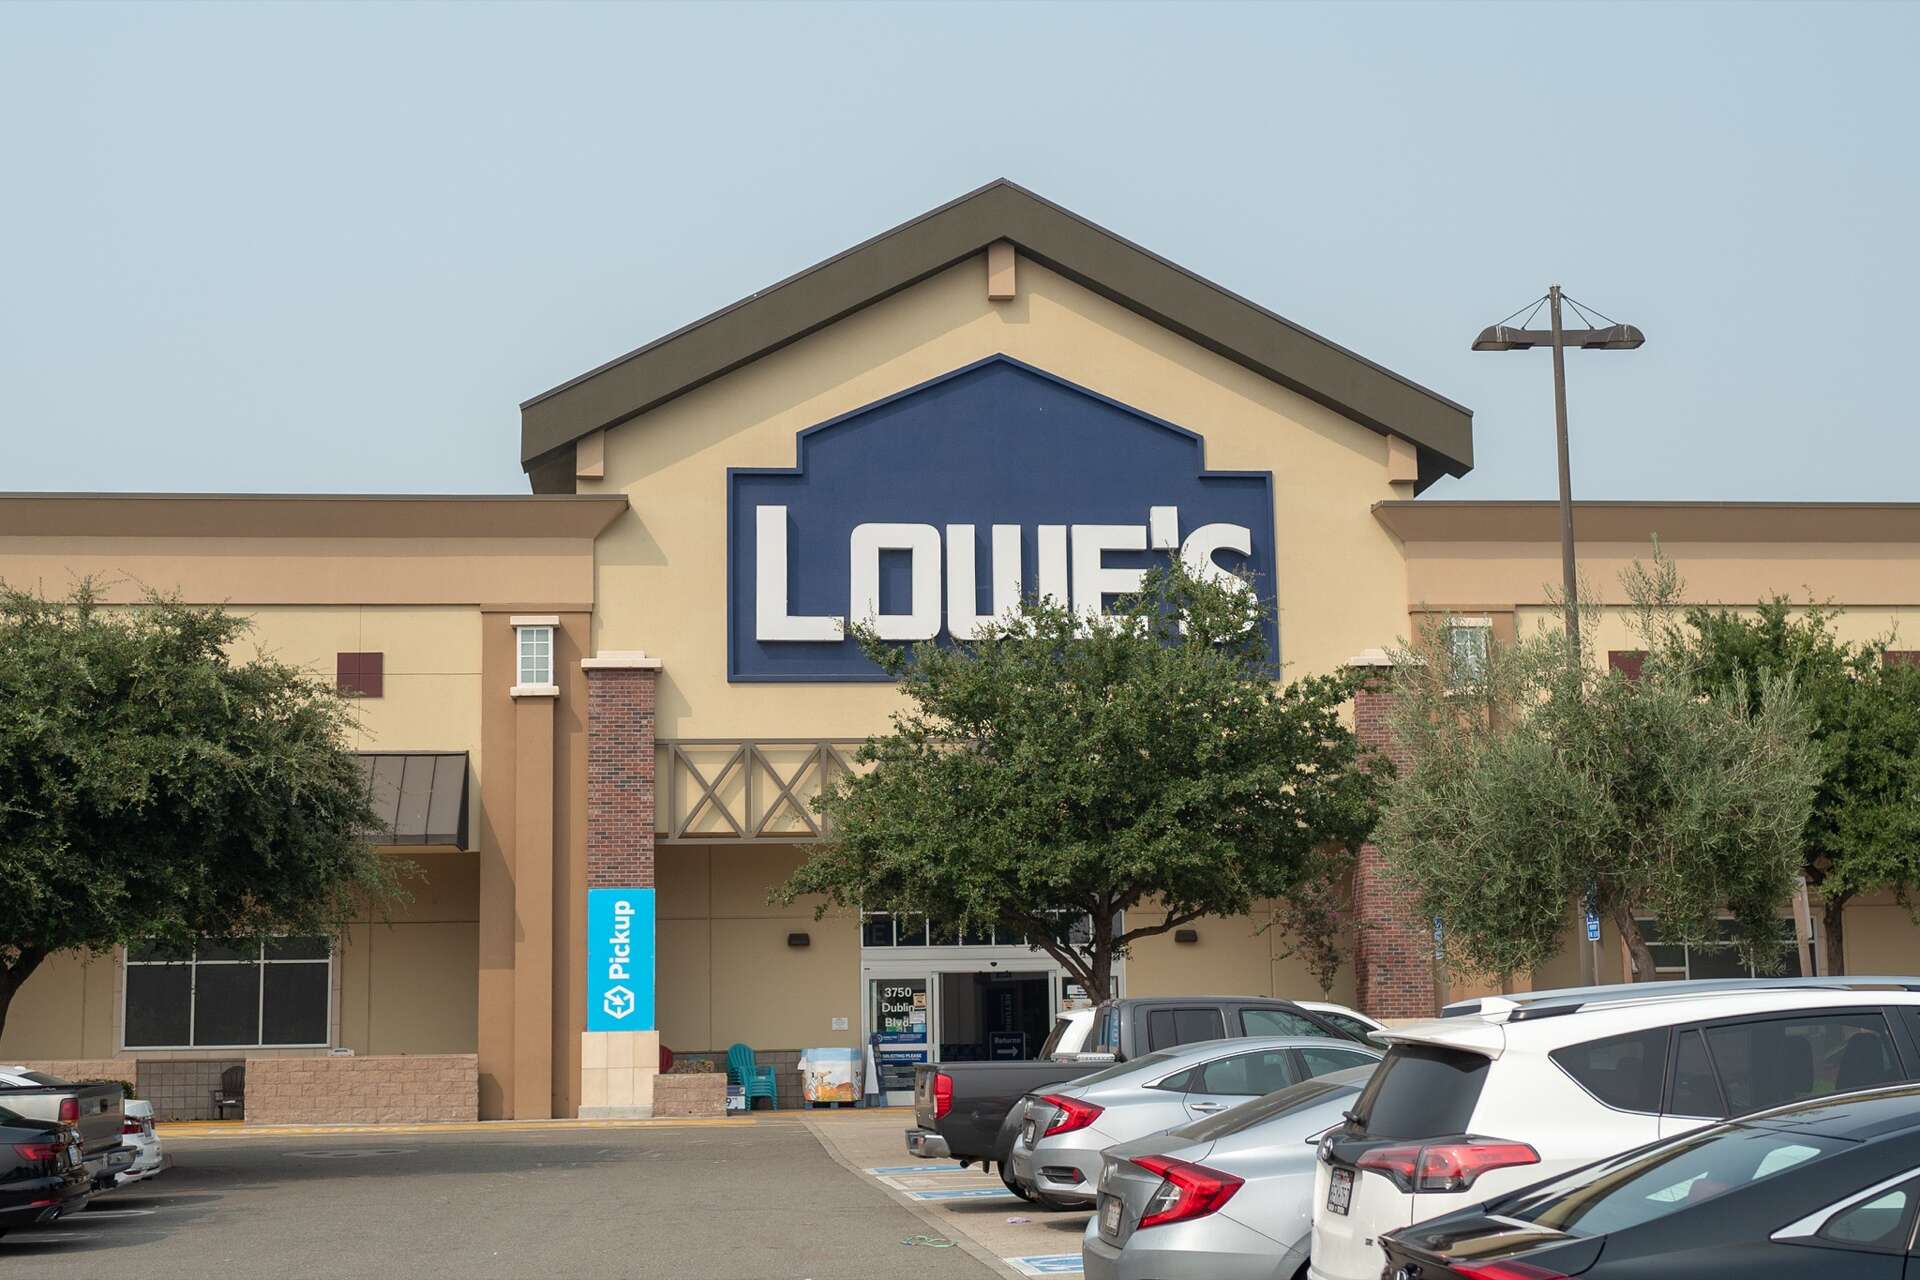 Lowe s sued for egregious sexual harassment by manager at Bay Area store